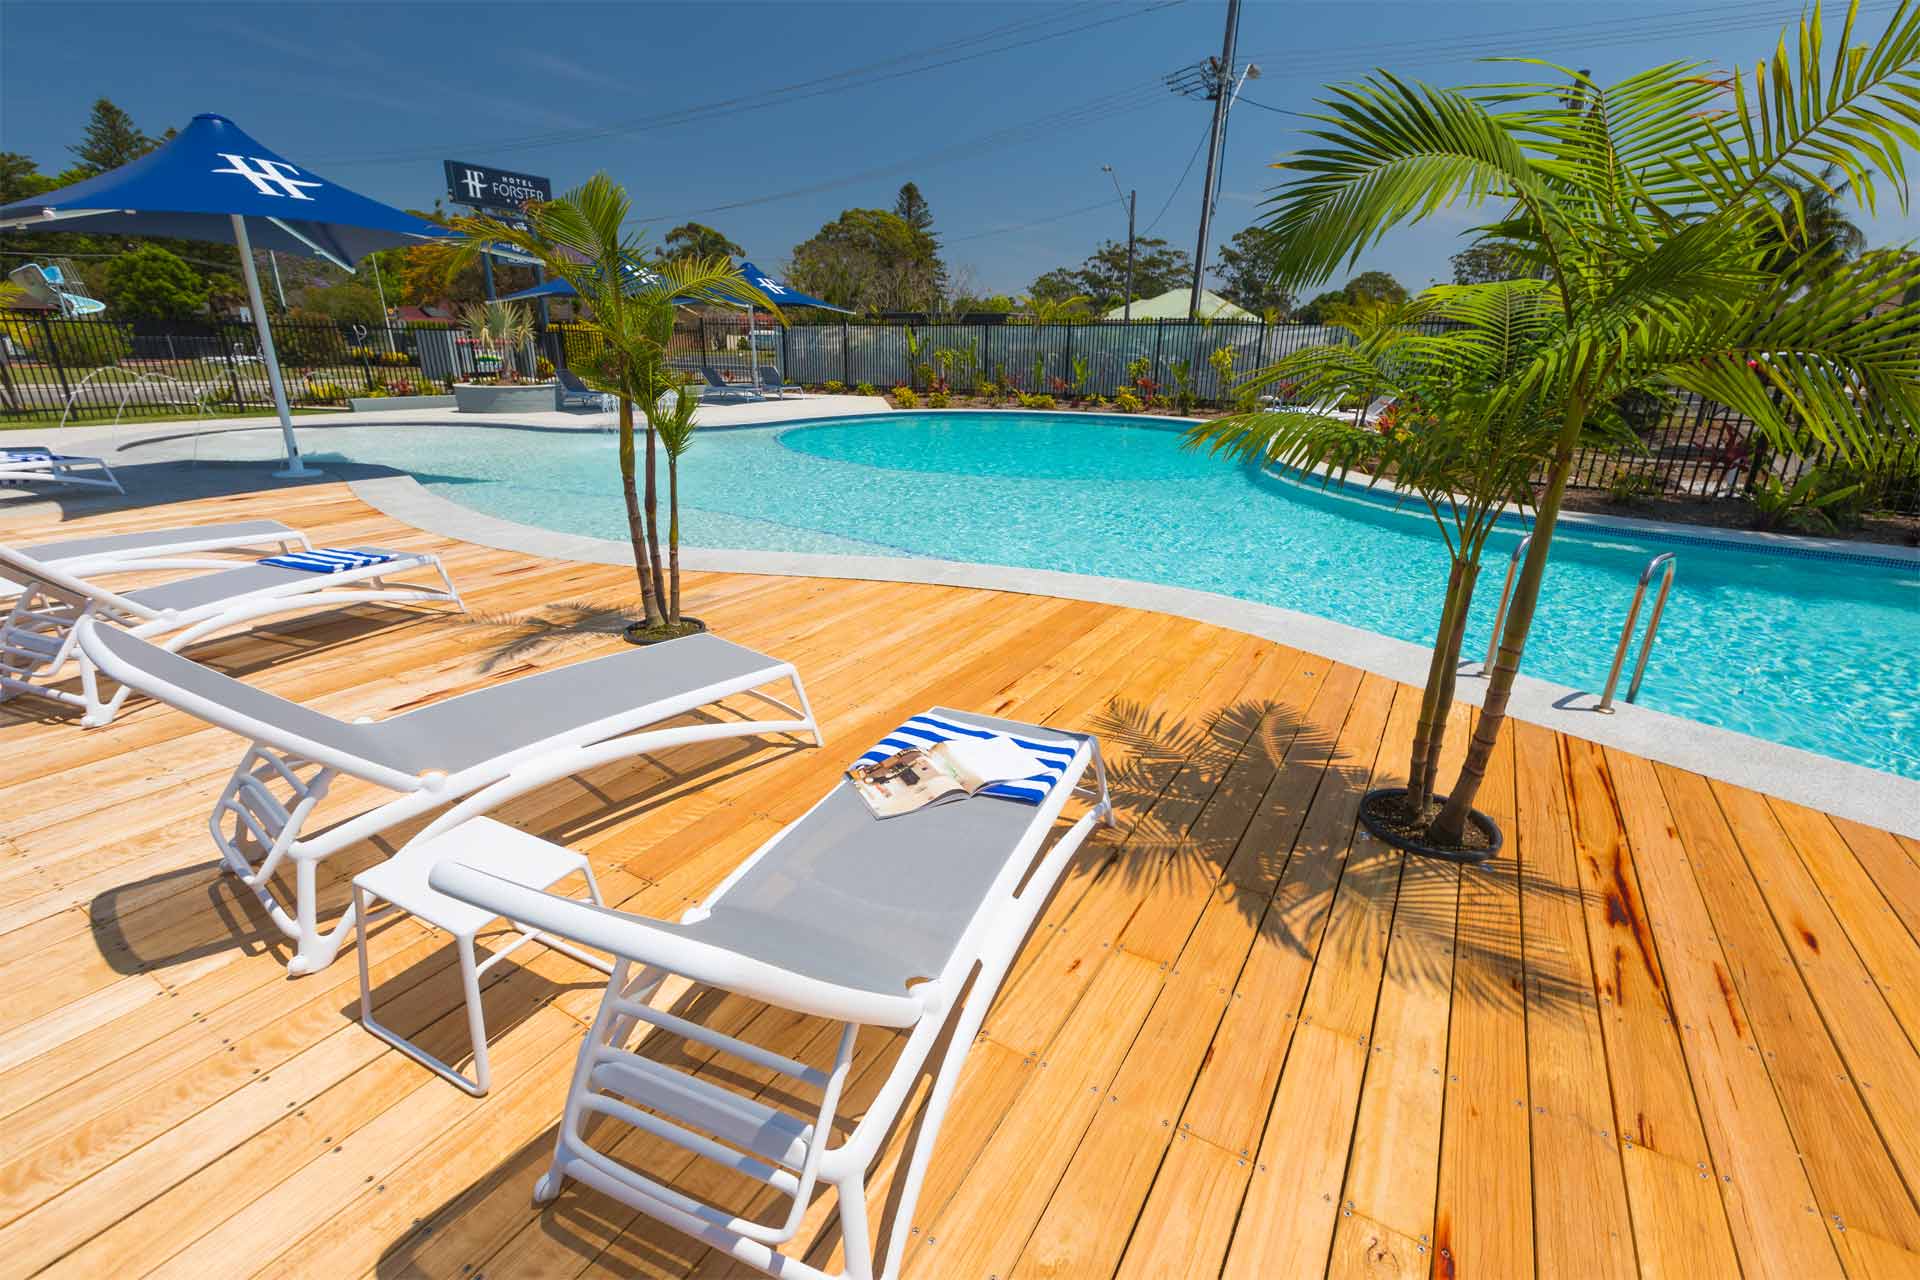 4. Relax by the pool at Hotel Forster